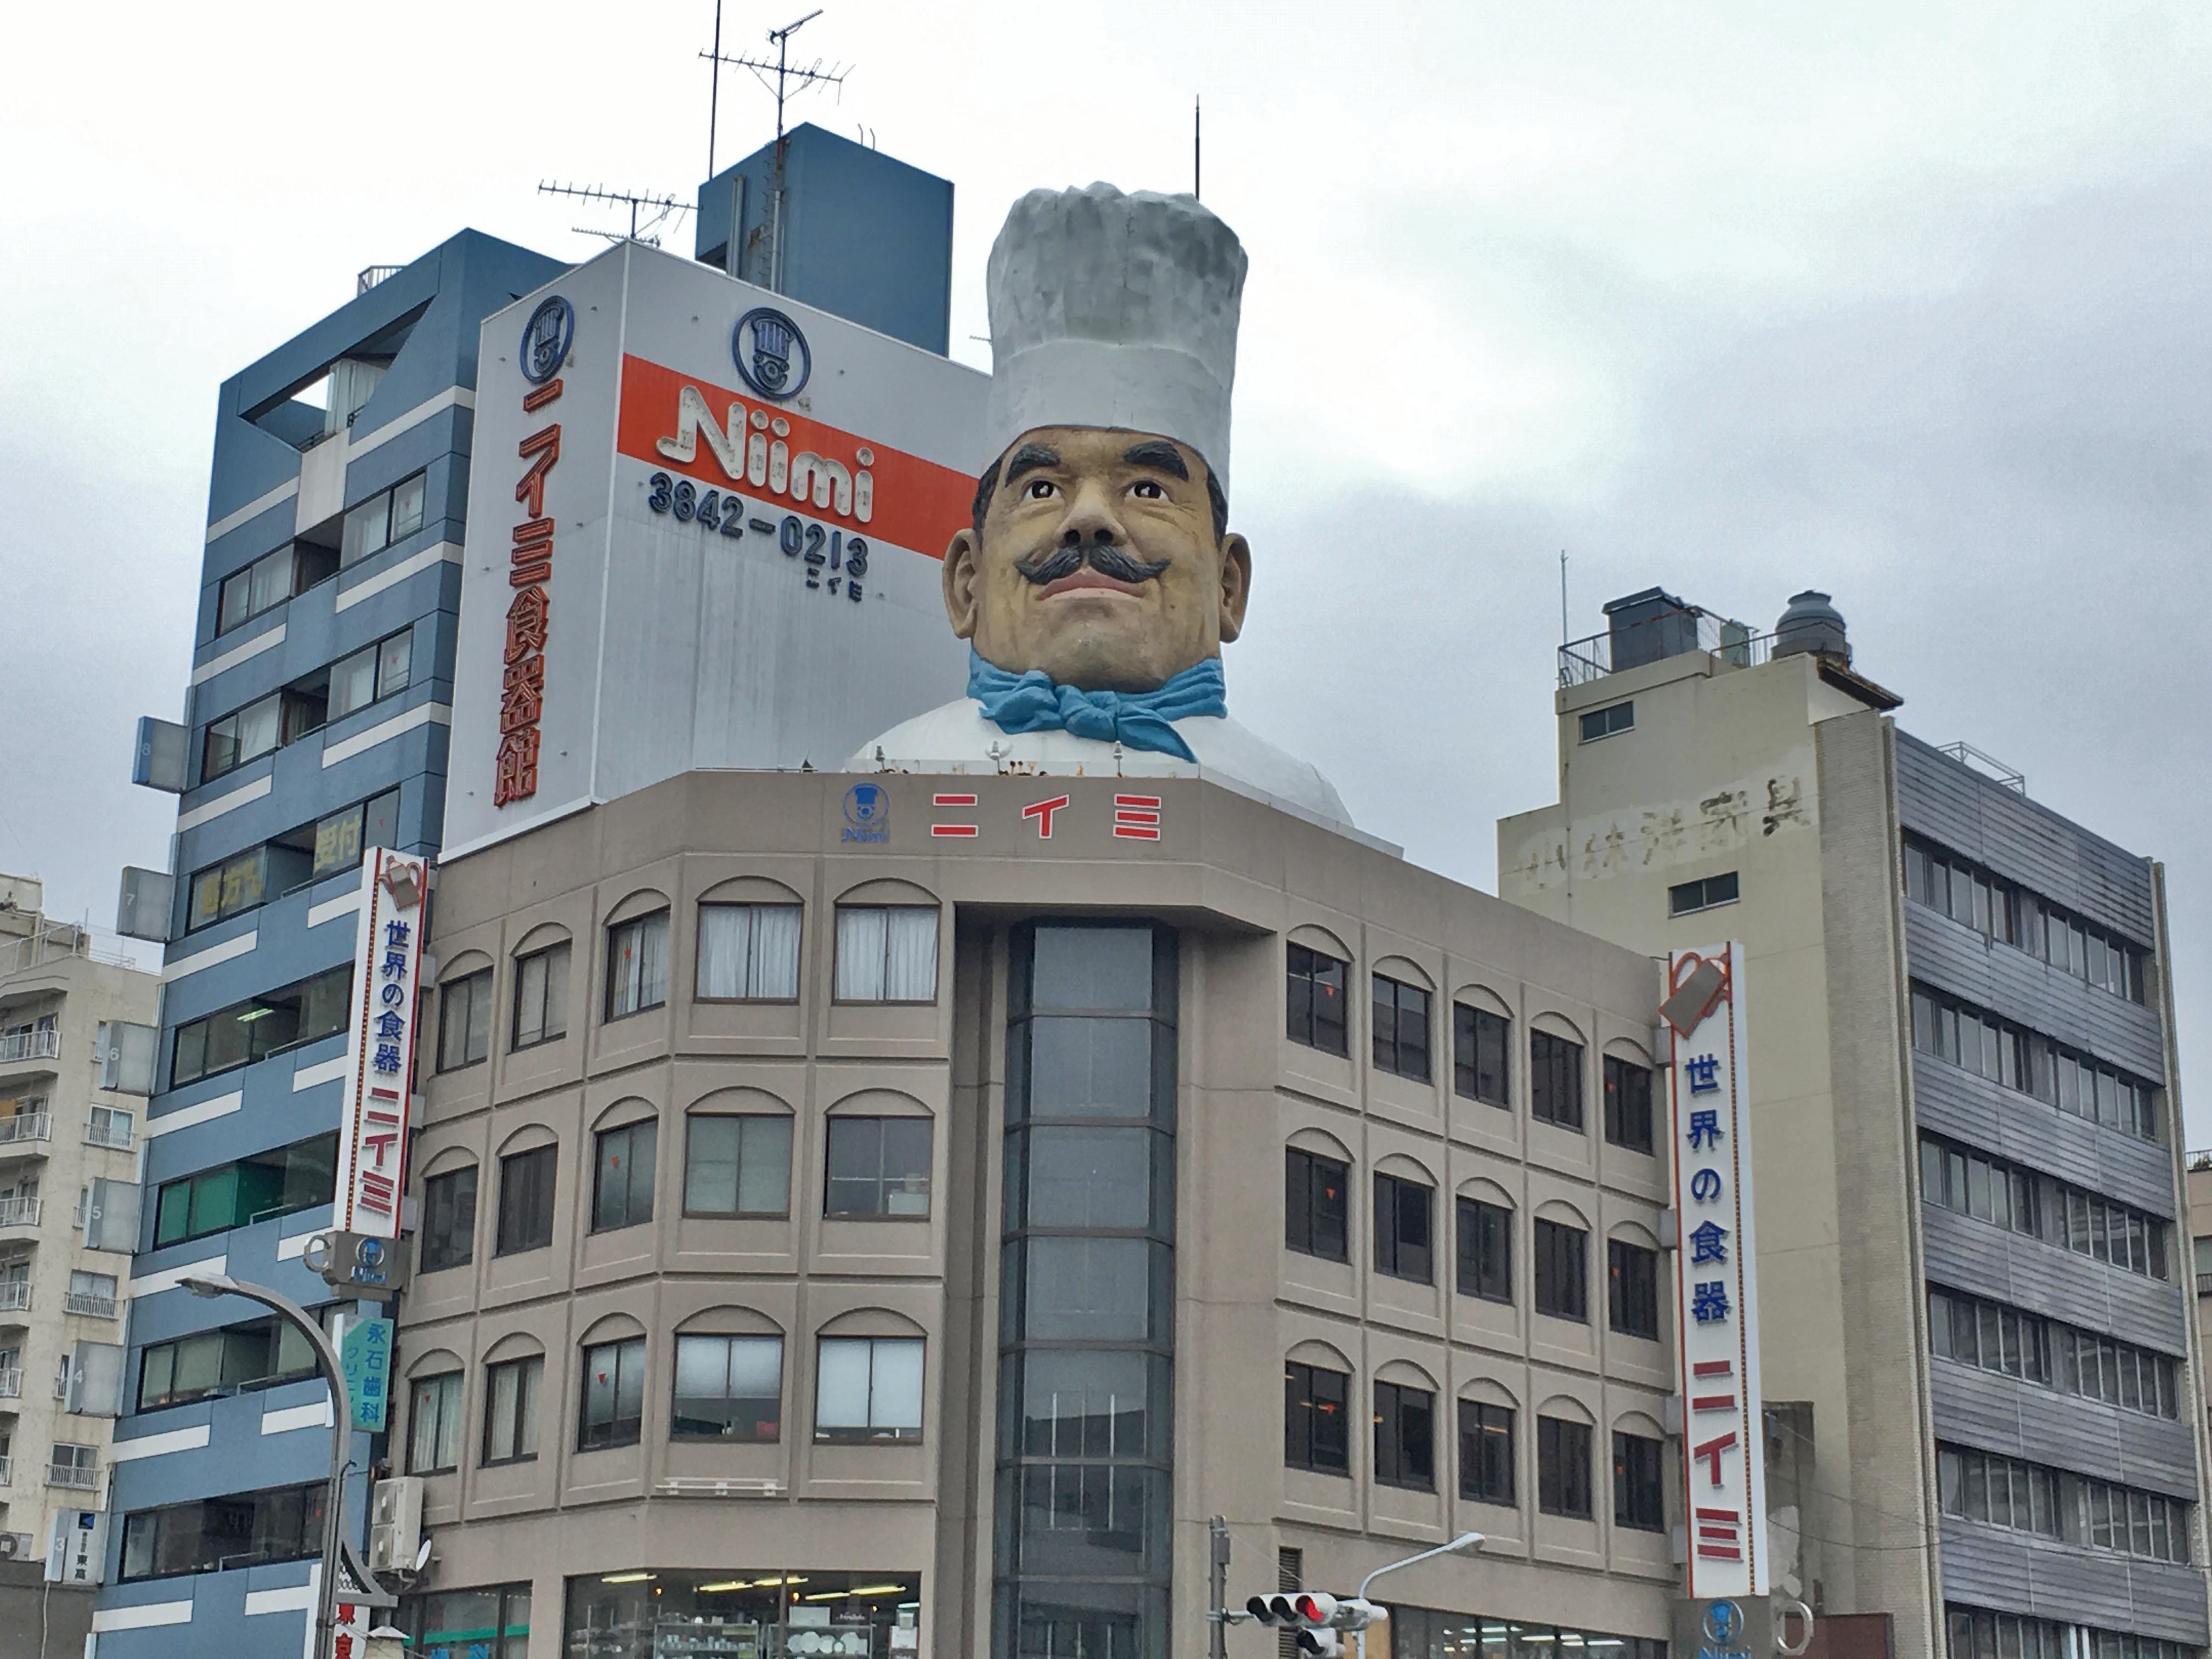 a large building with a large man's head on top